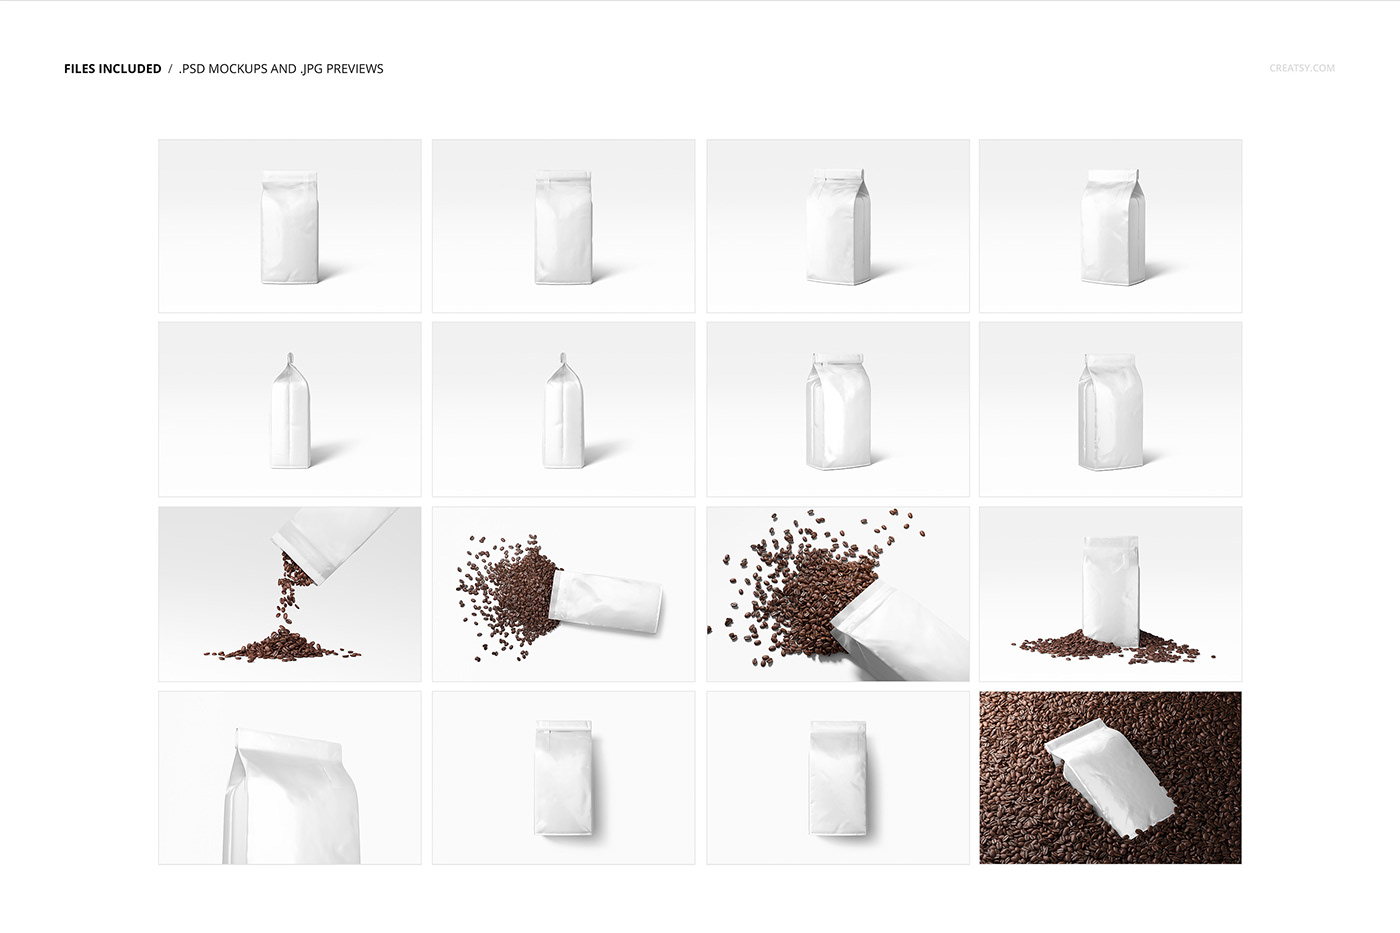 Coffee creatsy mock-up Mockup mockups Packaging paper pouch template